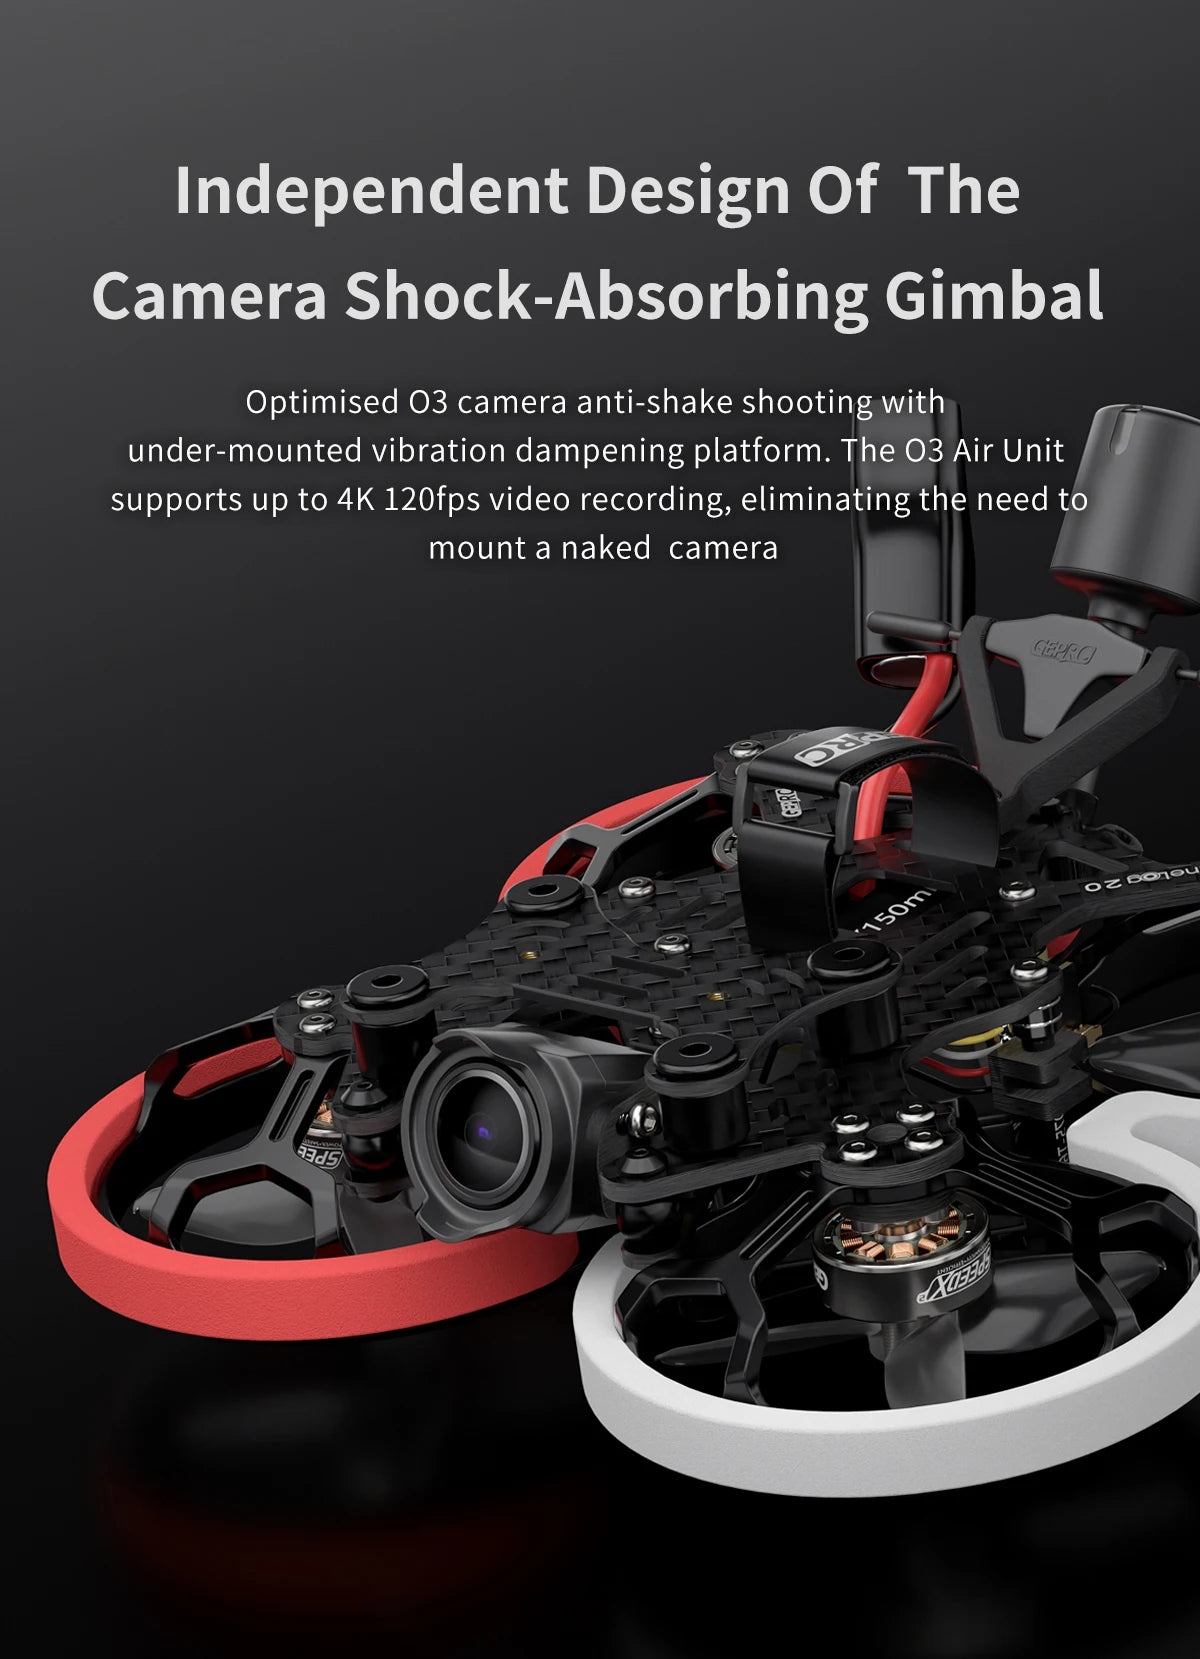 GEPRC Cinelog20 HD - AVATAR Walksnail FPV, GEPRC Cinelog20 HD, the 03 Air Unit supports up to 4K 120fps video recording . the camera